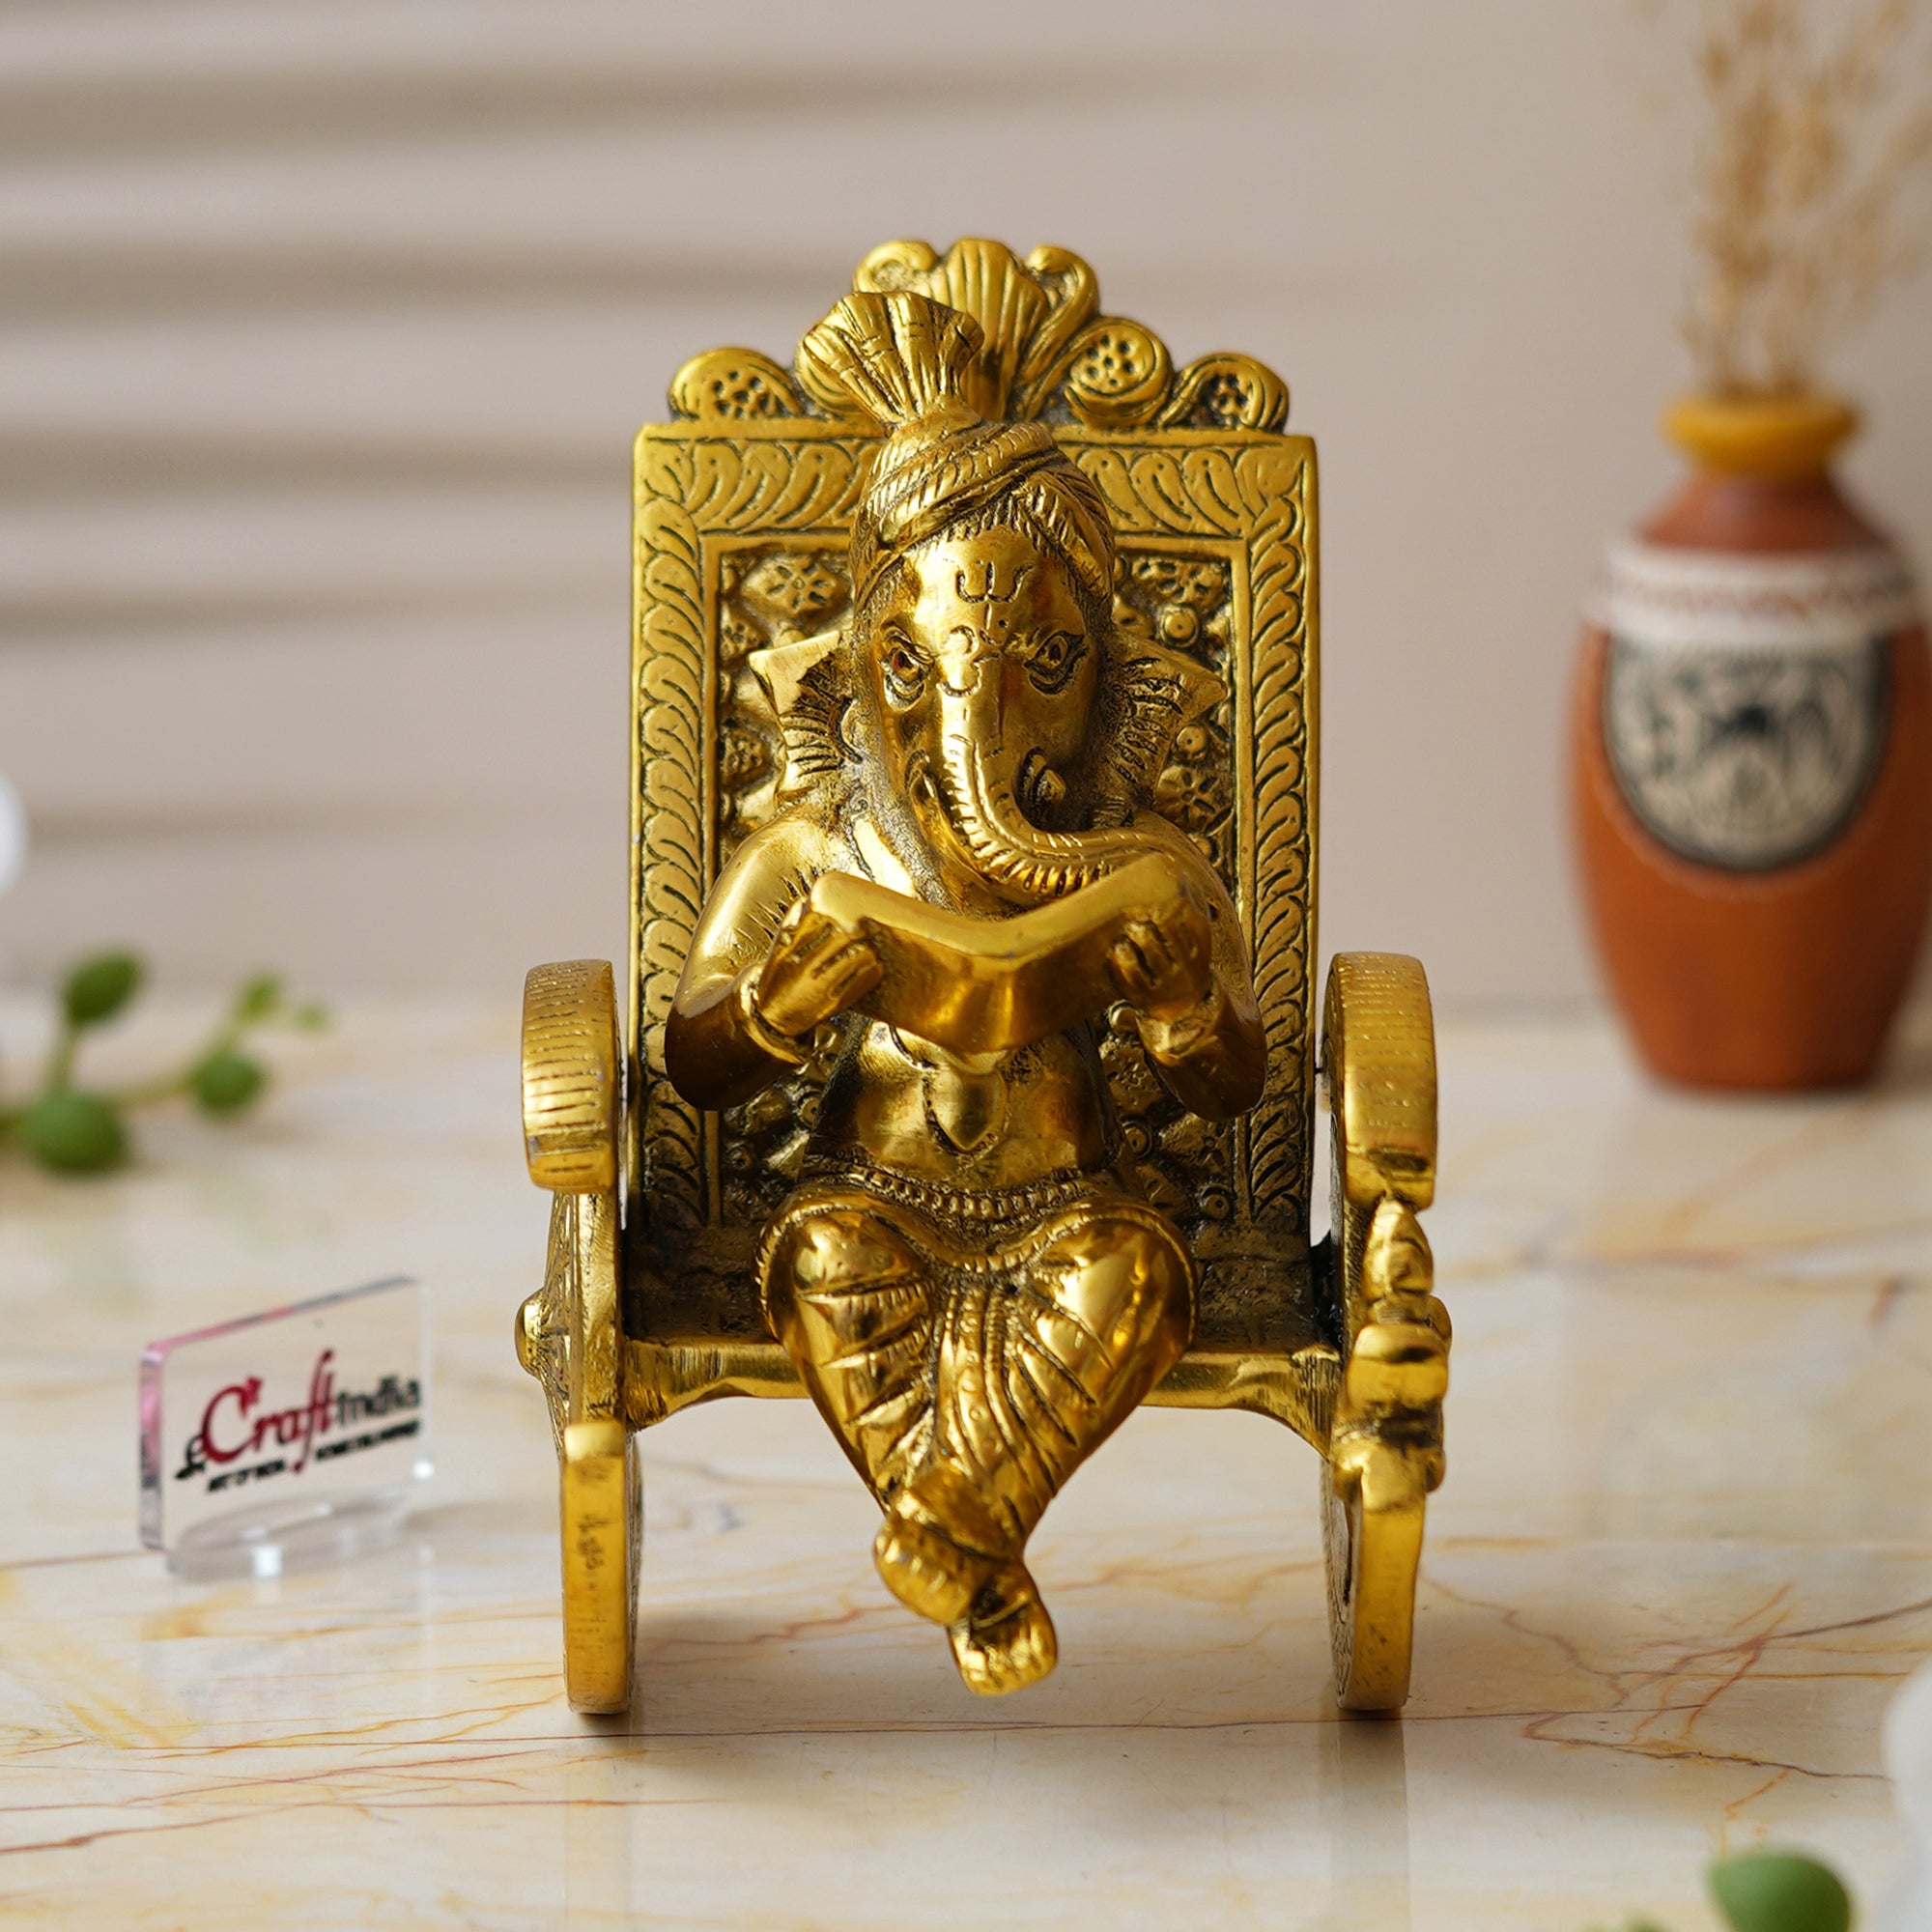 Golden Metal Handcrafted Lord Ganesha Idol Reading Book on Rocking Chair 5